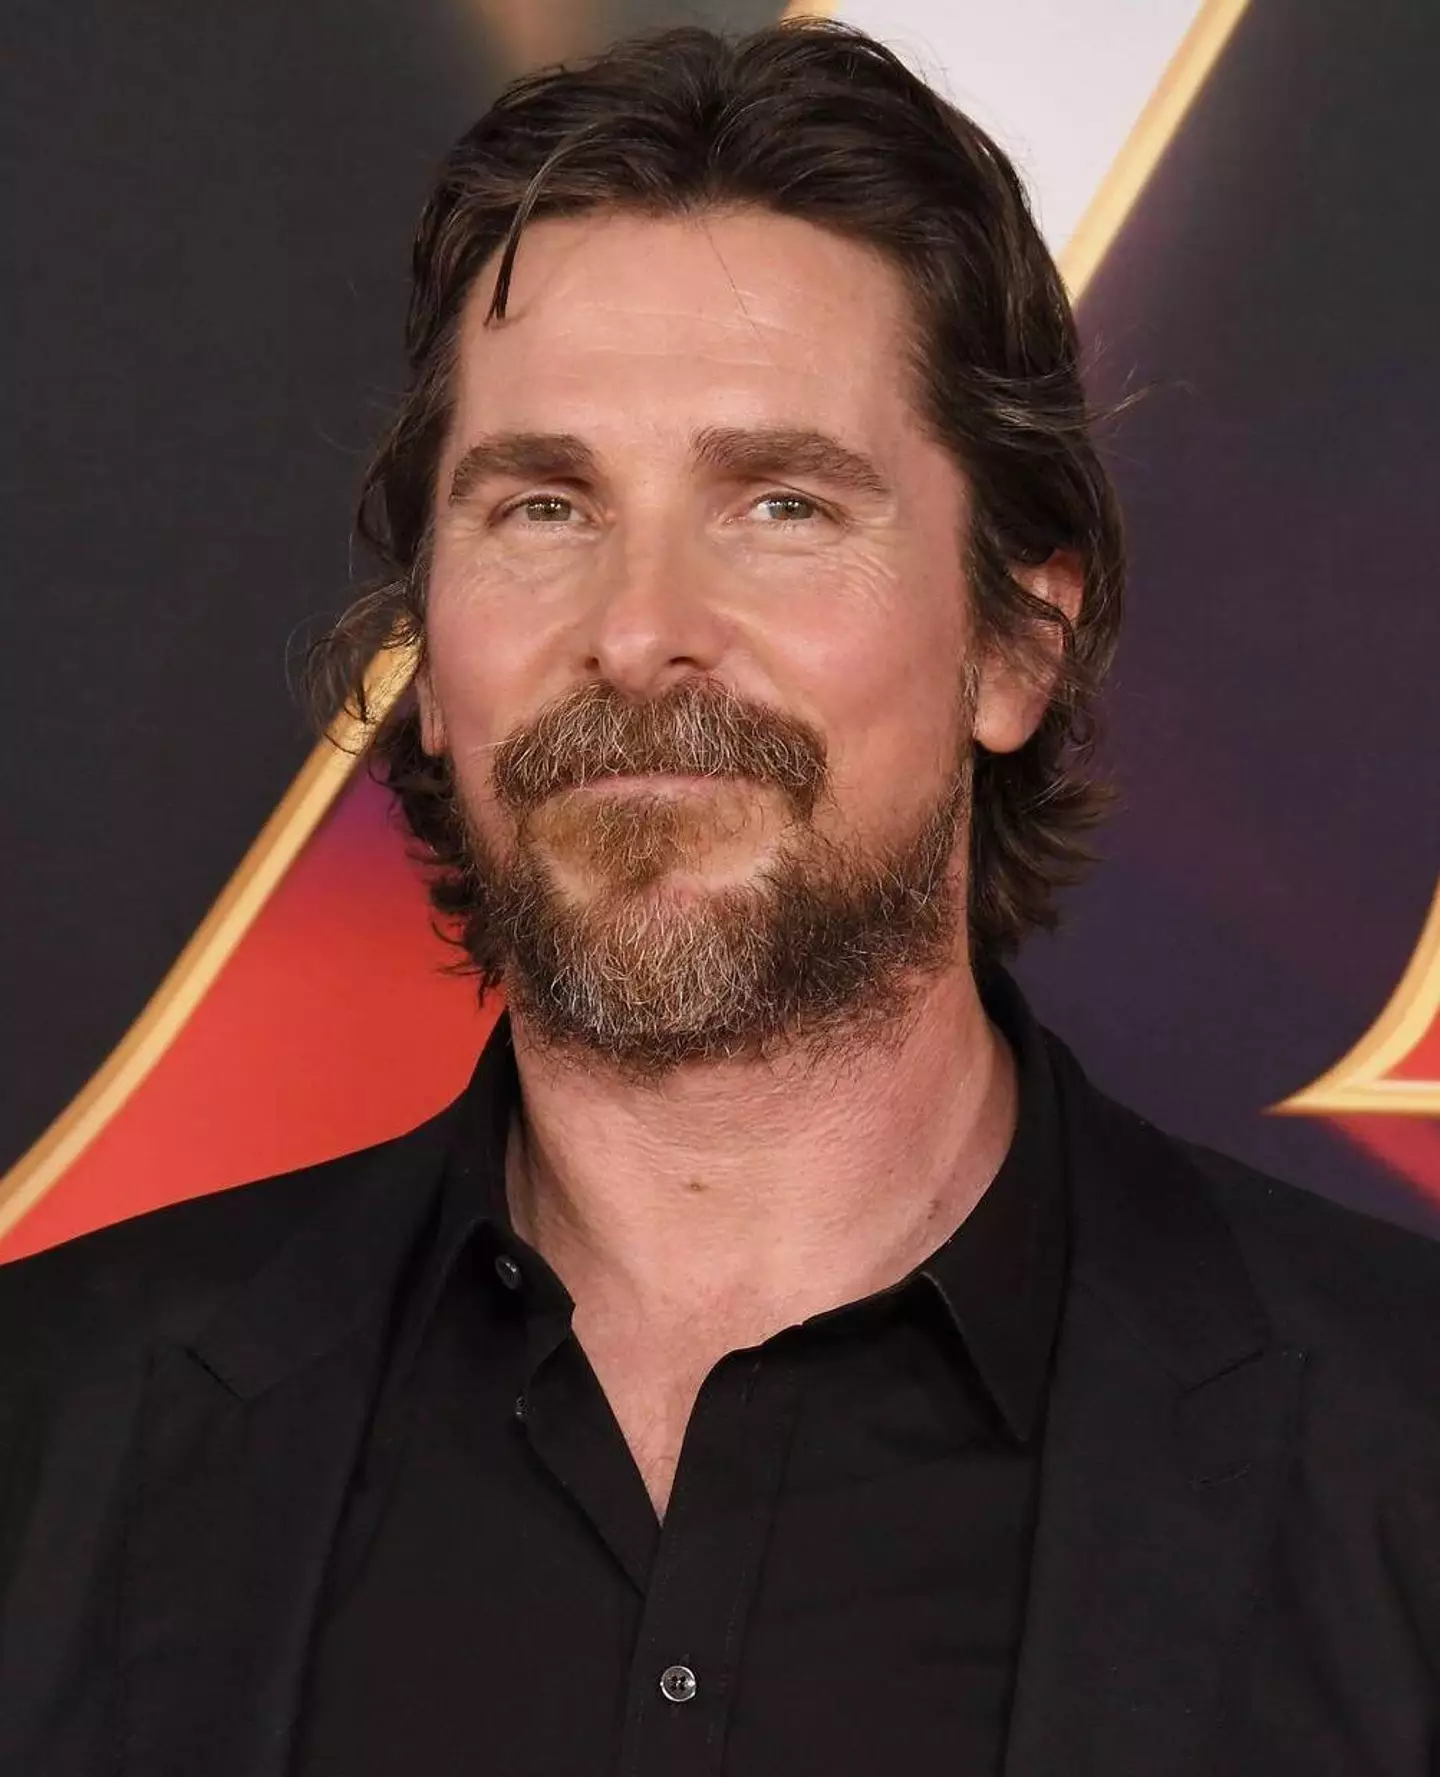 Christian Bale plays the villain in the new Thor film.